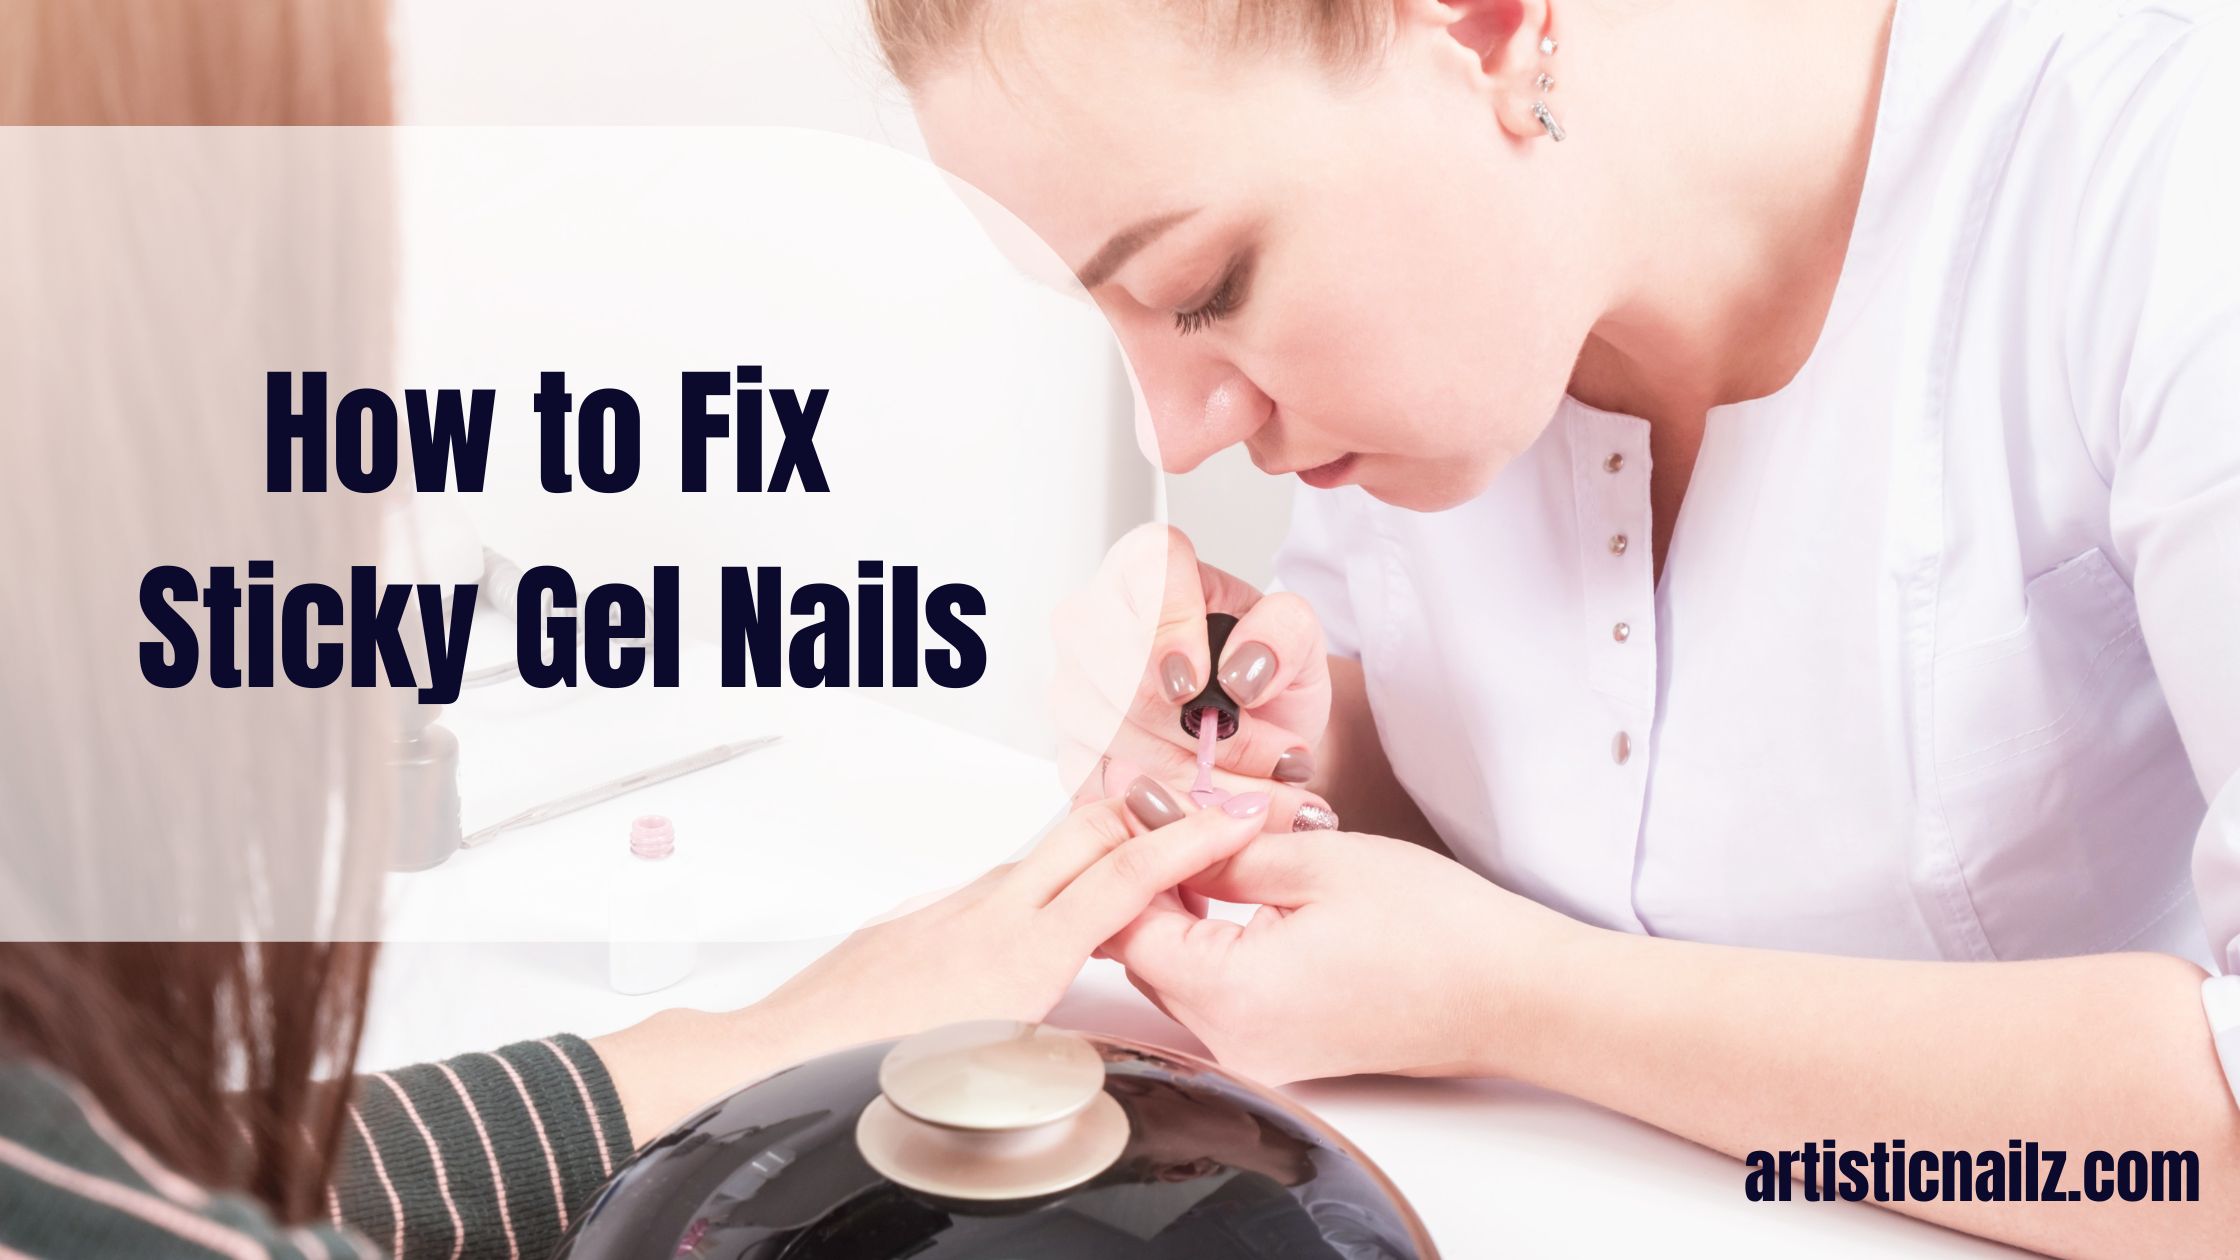 How to Fix Sticky Gel Nails